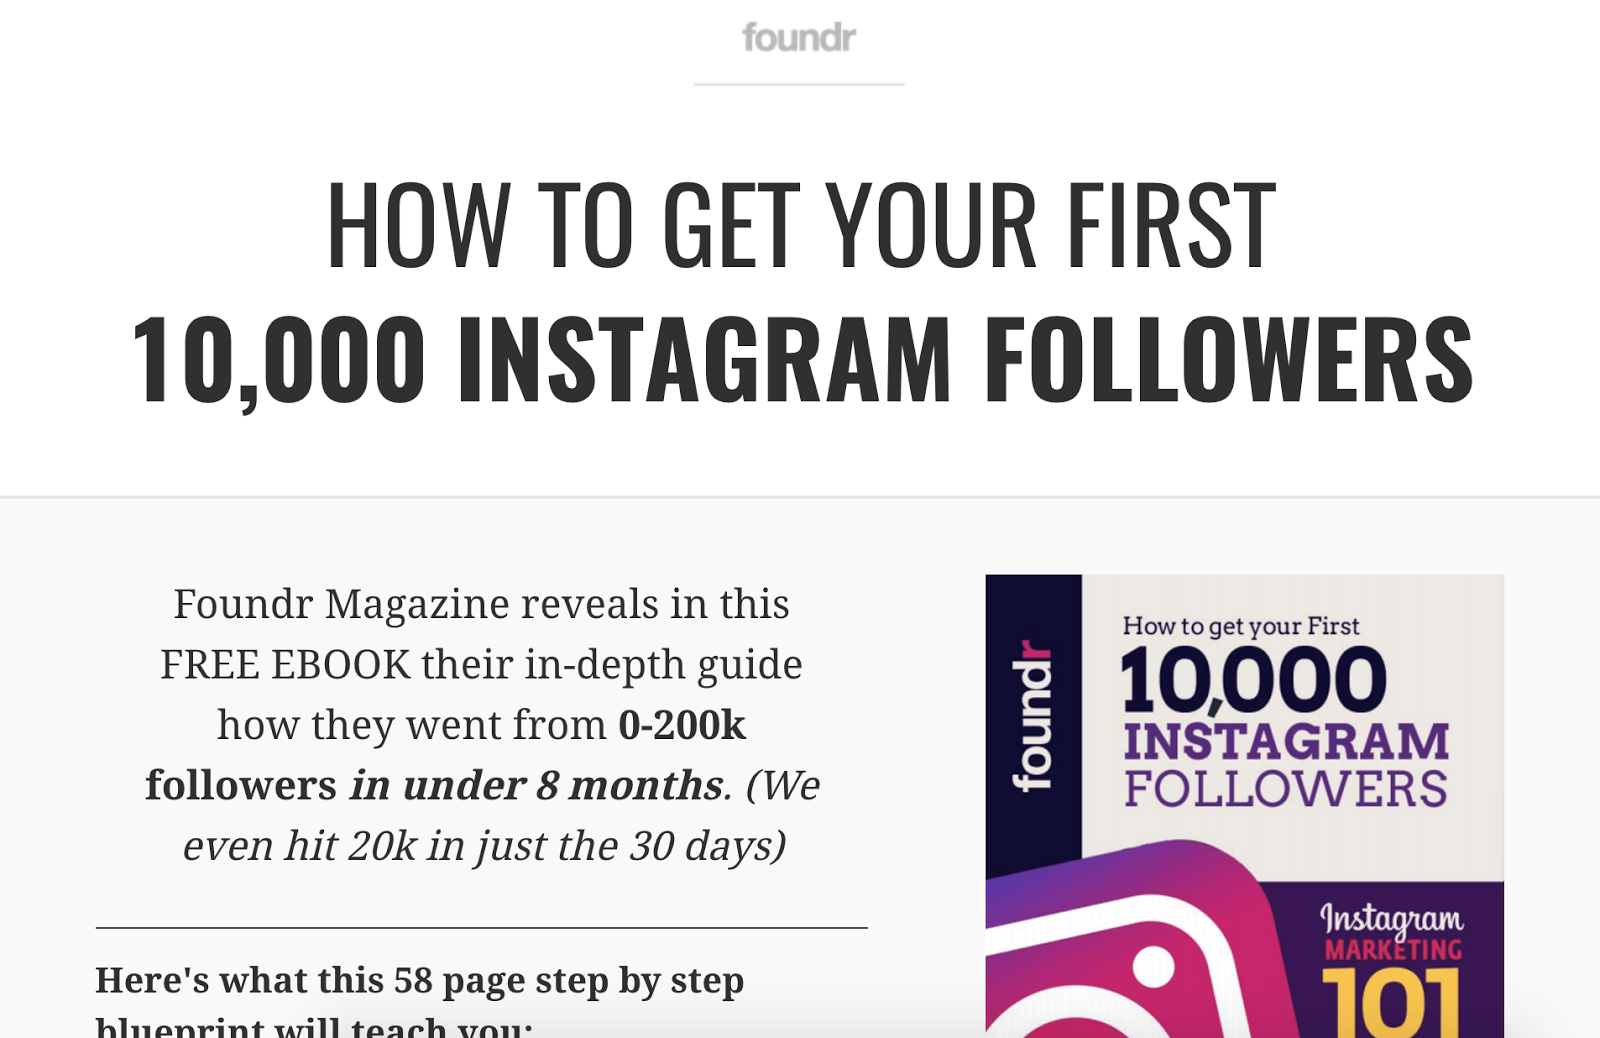 Foundr Magazine used a bio link to drive subscribers - Instagram Marketing